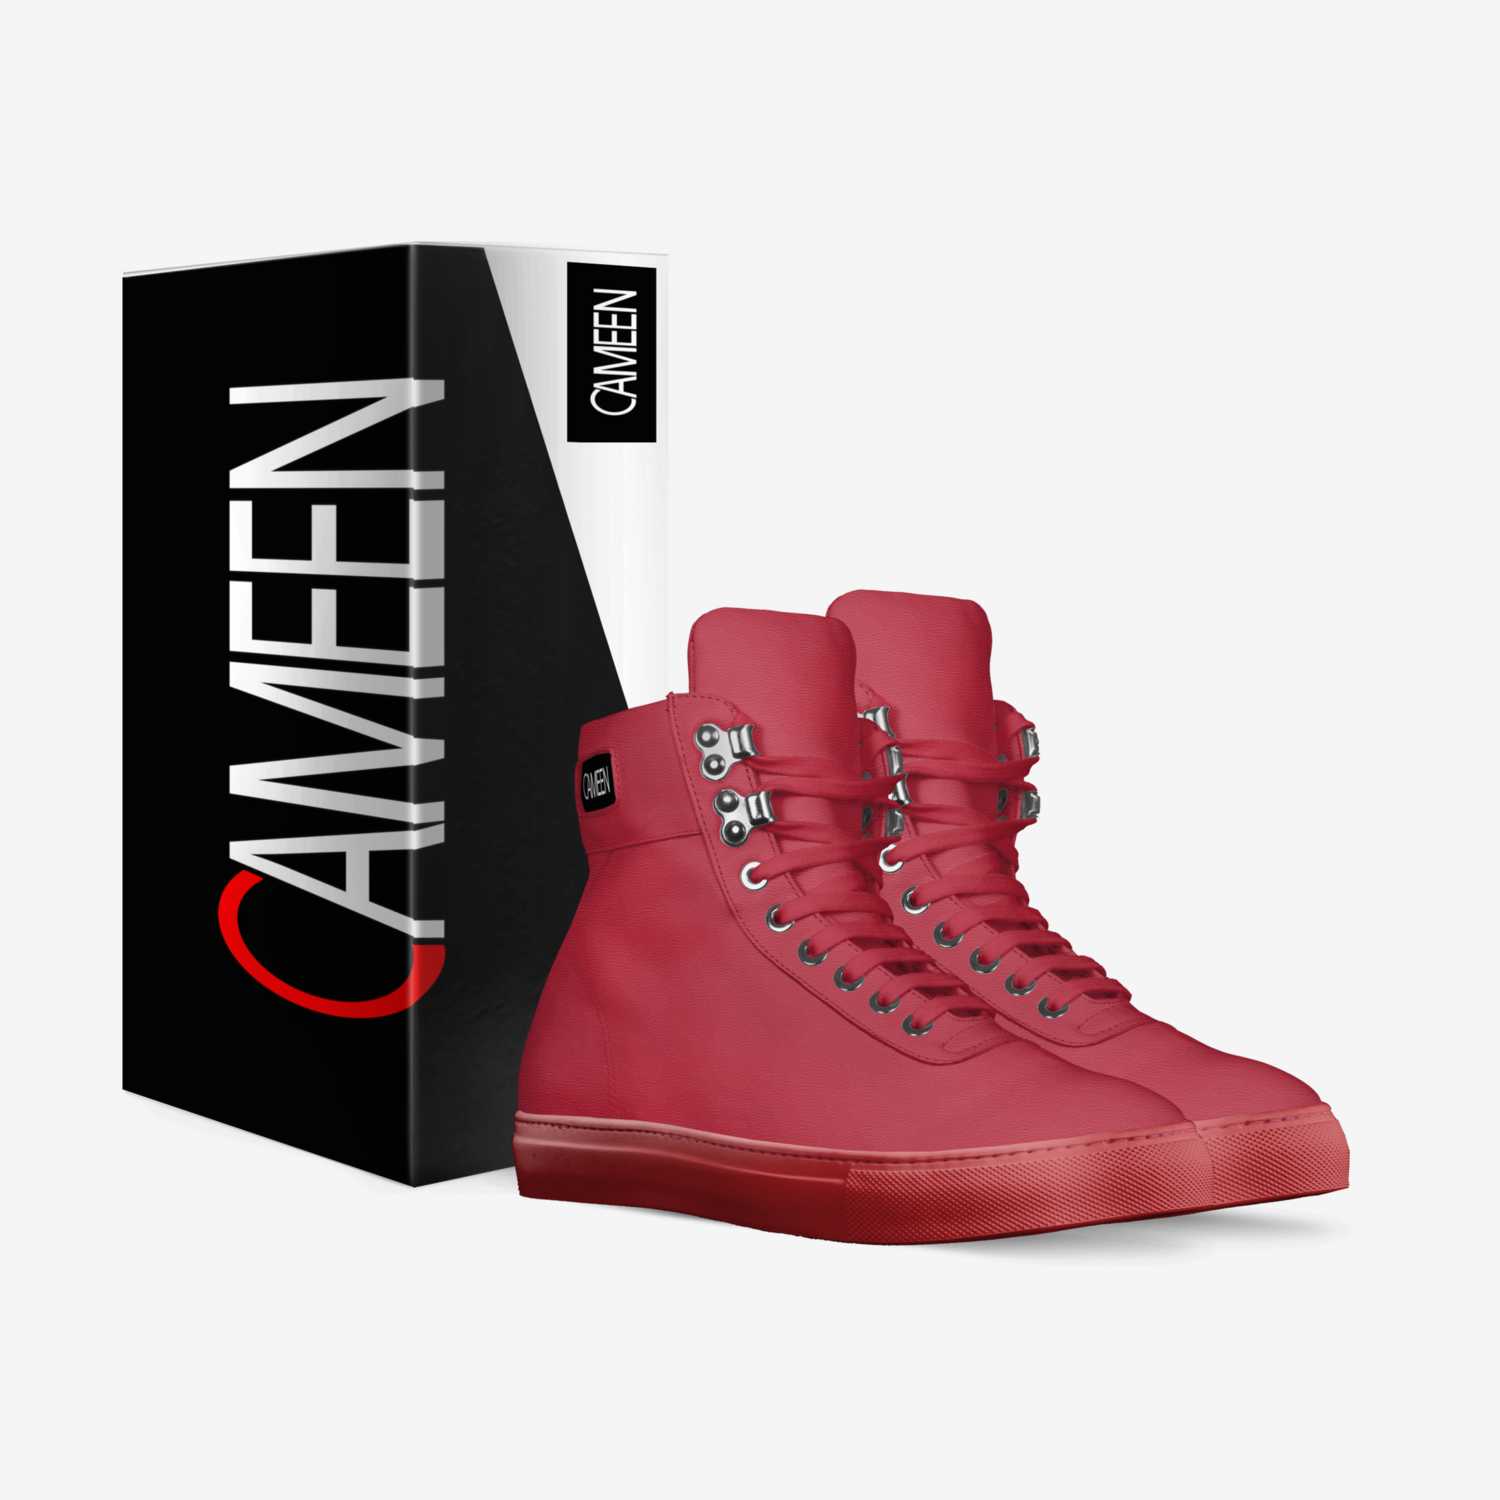 CASUAL COMFORT custom made in Italy shoes by Cameen Copeland | Box view